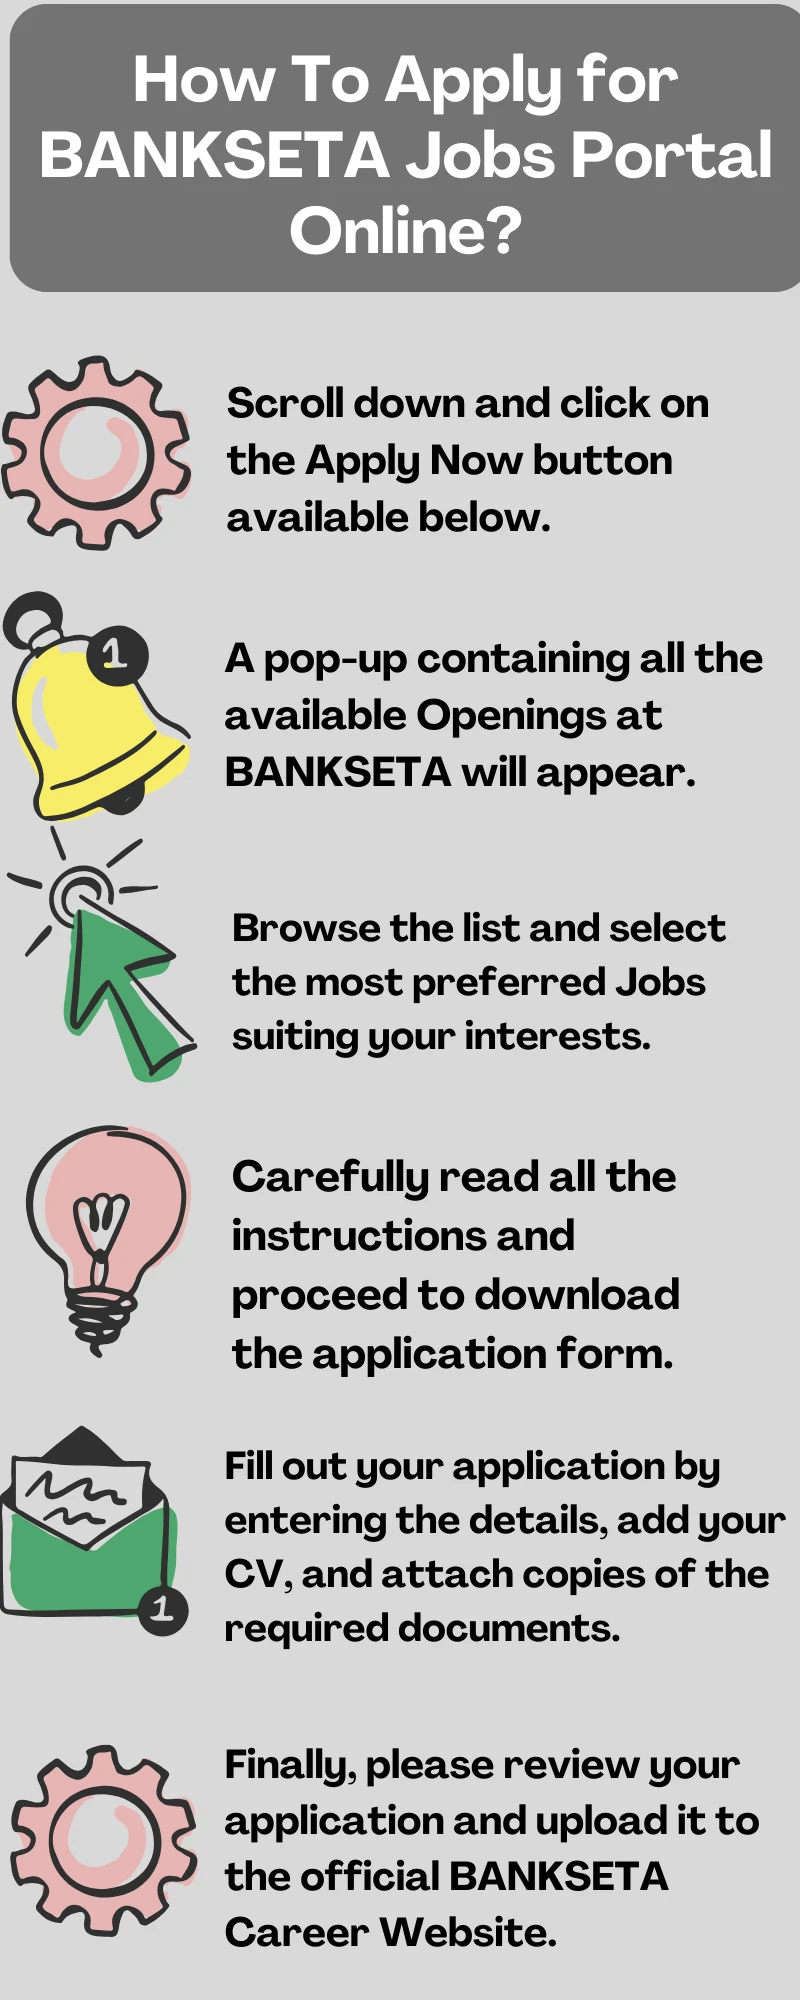 Finally, please review your application and upload it to the official BANKSETA Career Website.